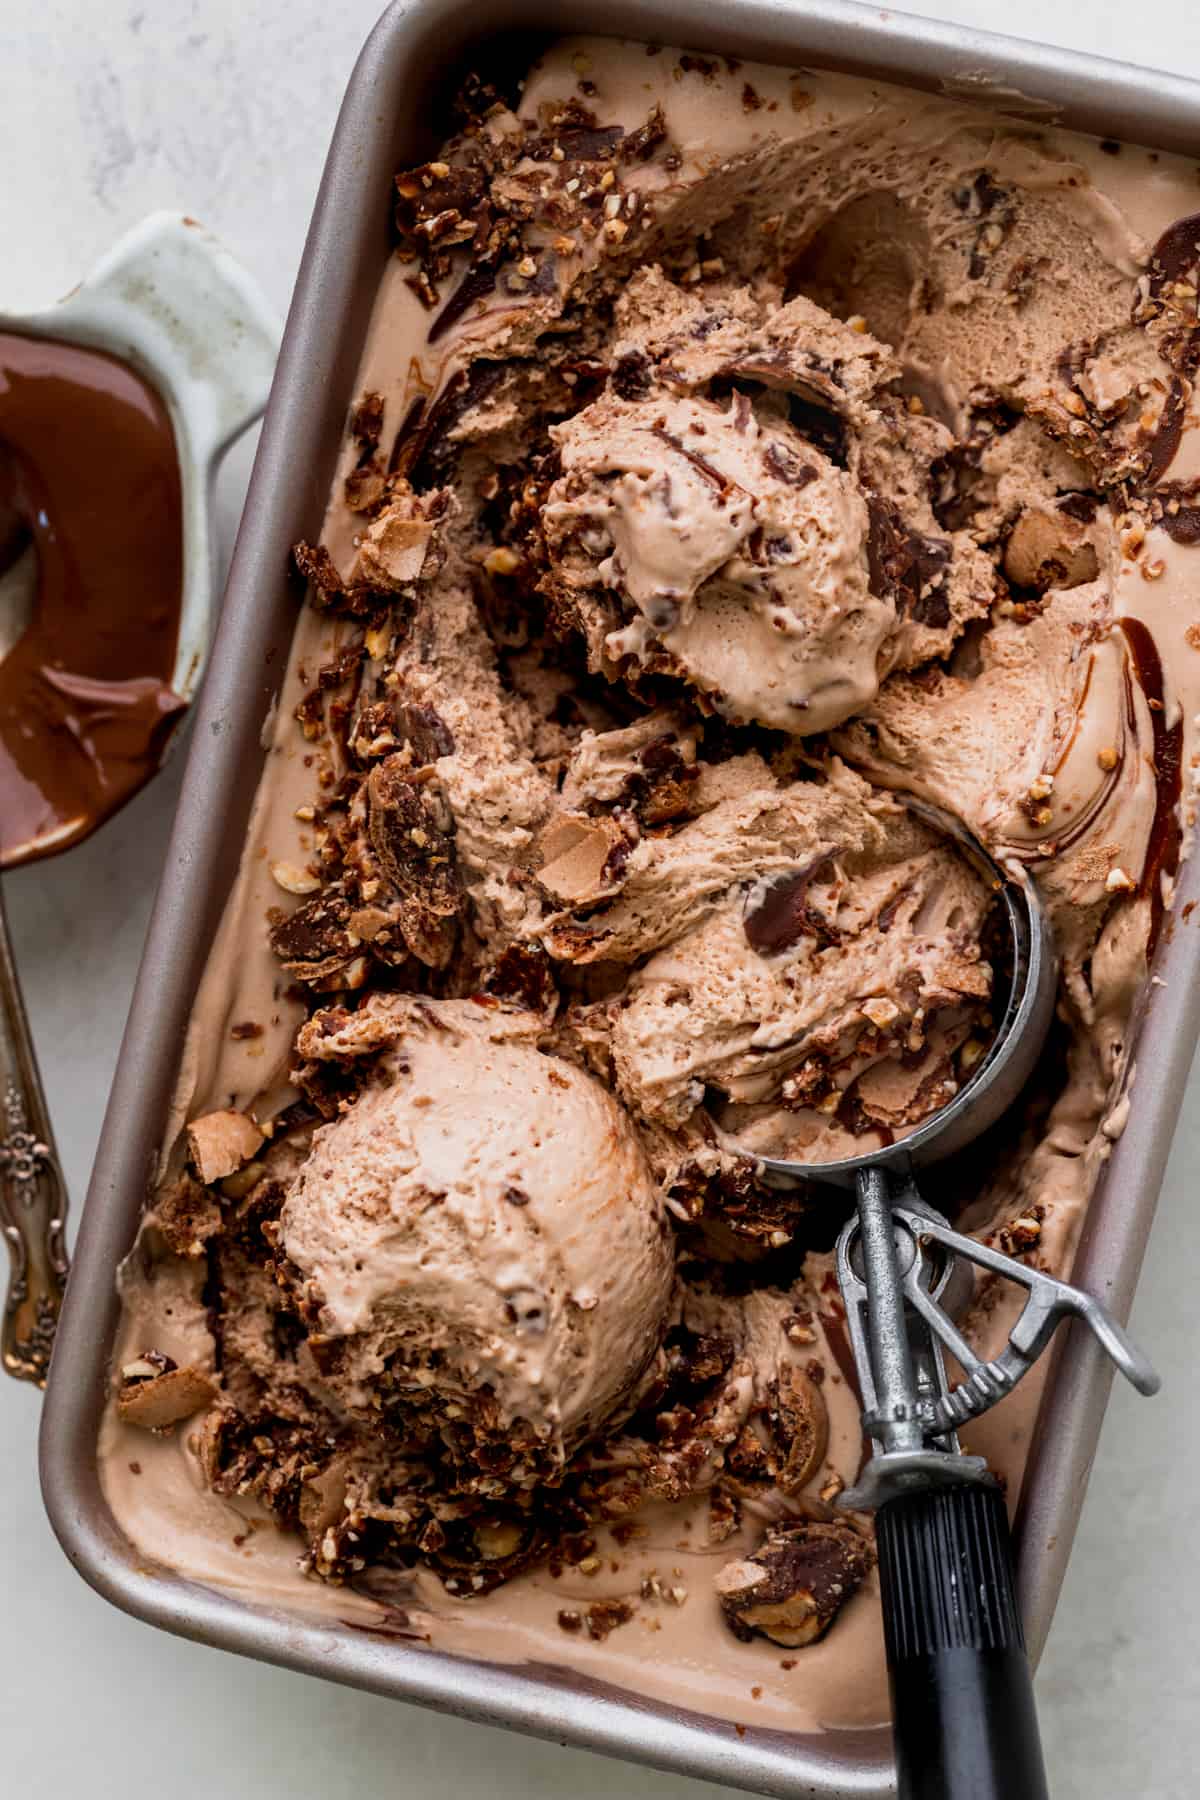 Nutella ice cream in a tin with an ice cream scoop.